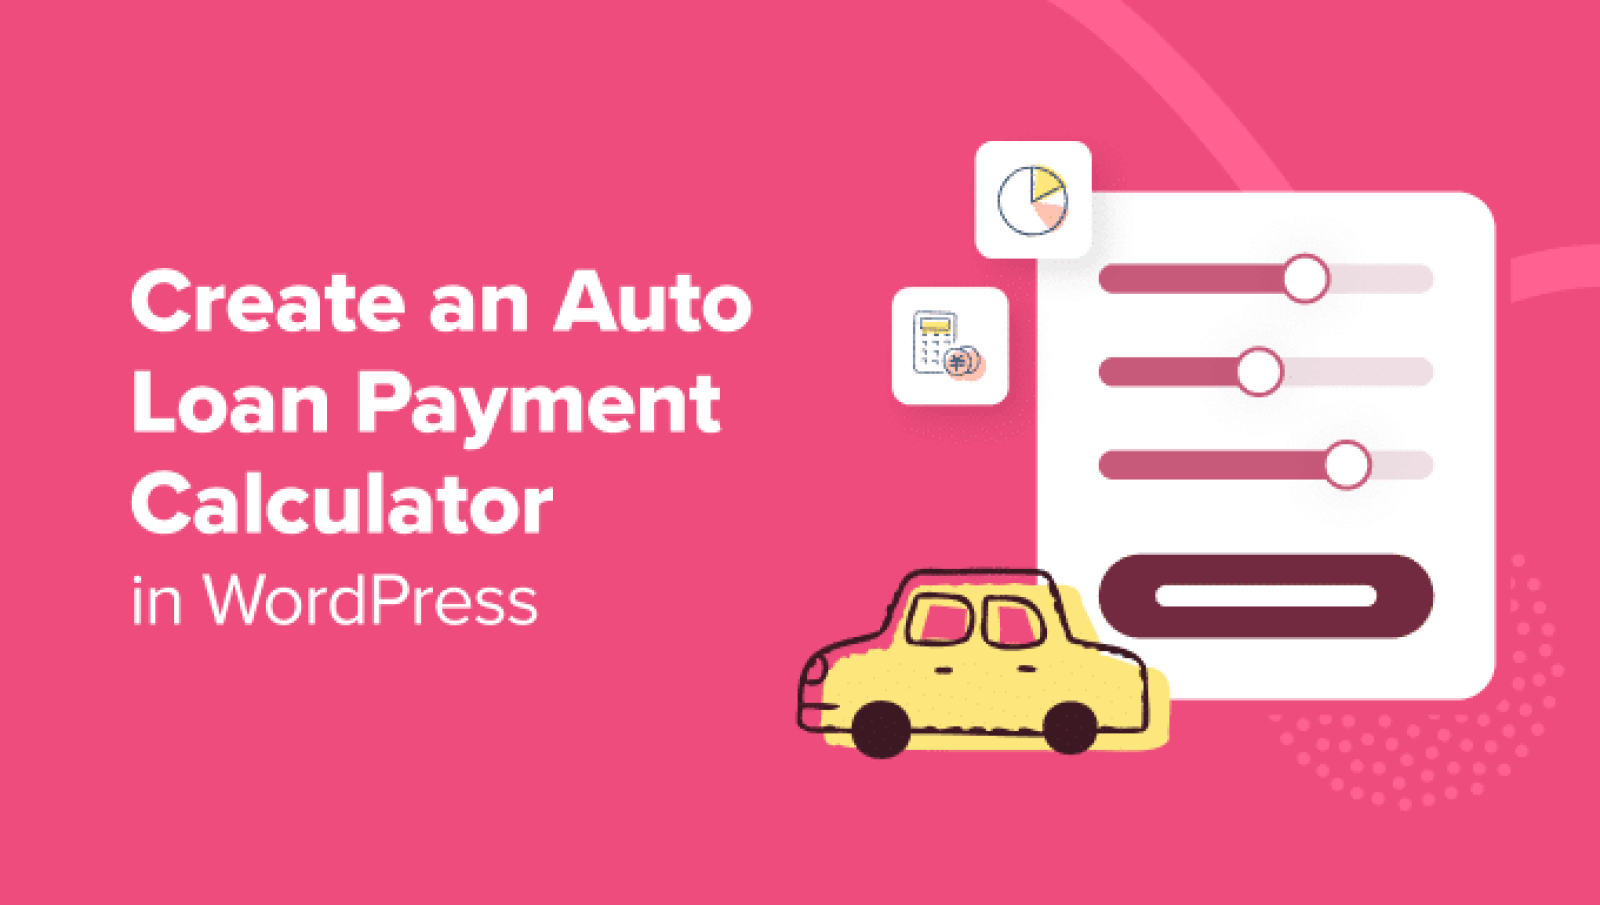 Learn how to Create an Auto Mortgage / Automotive Cost Calculator in WordPress